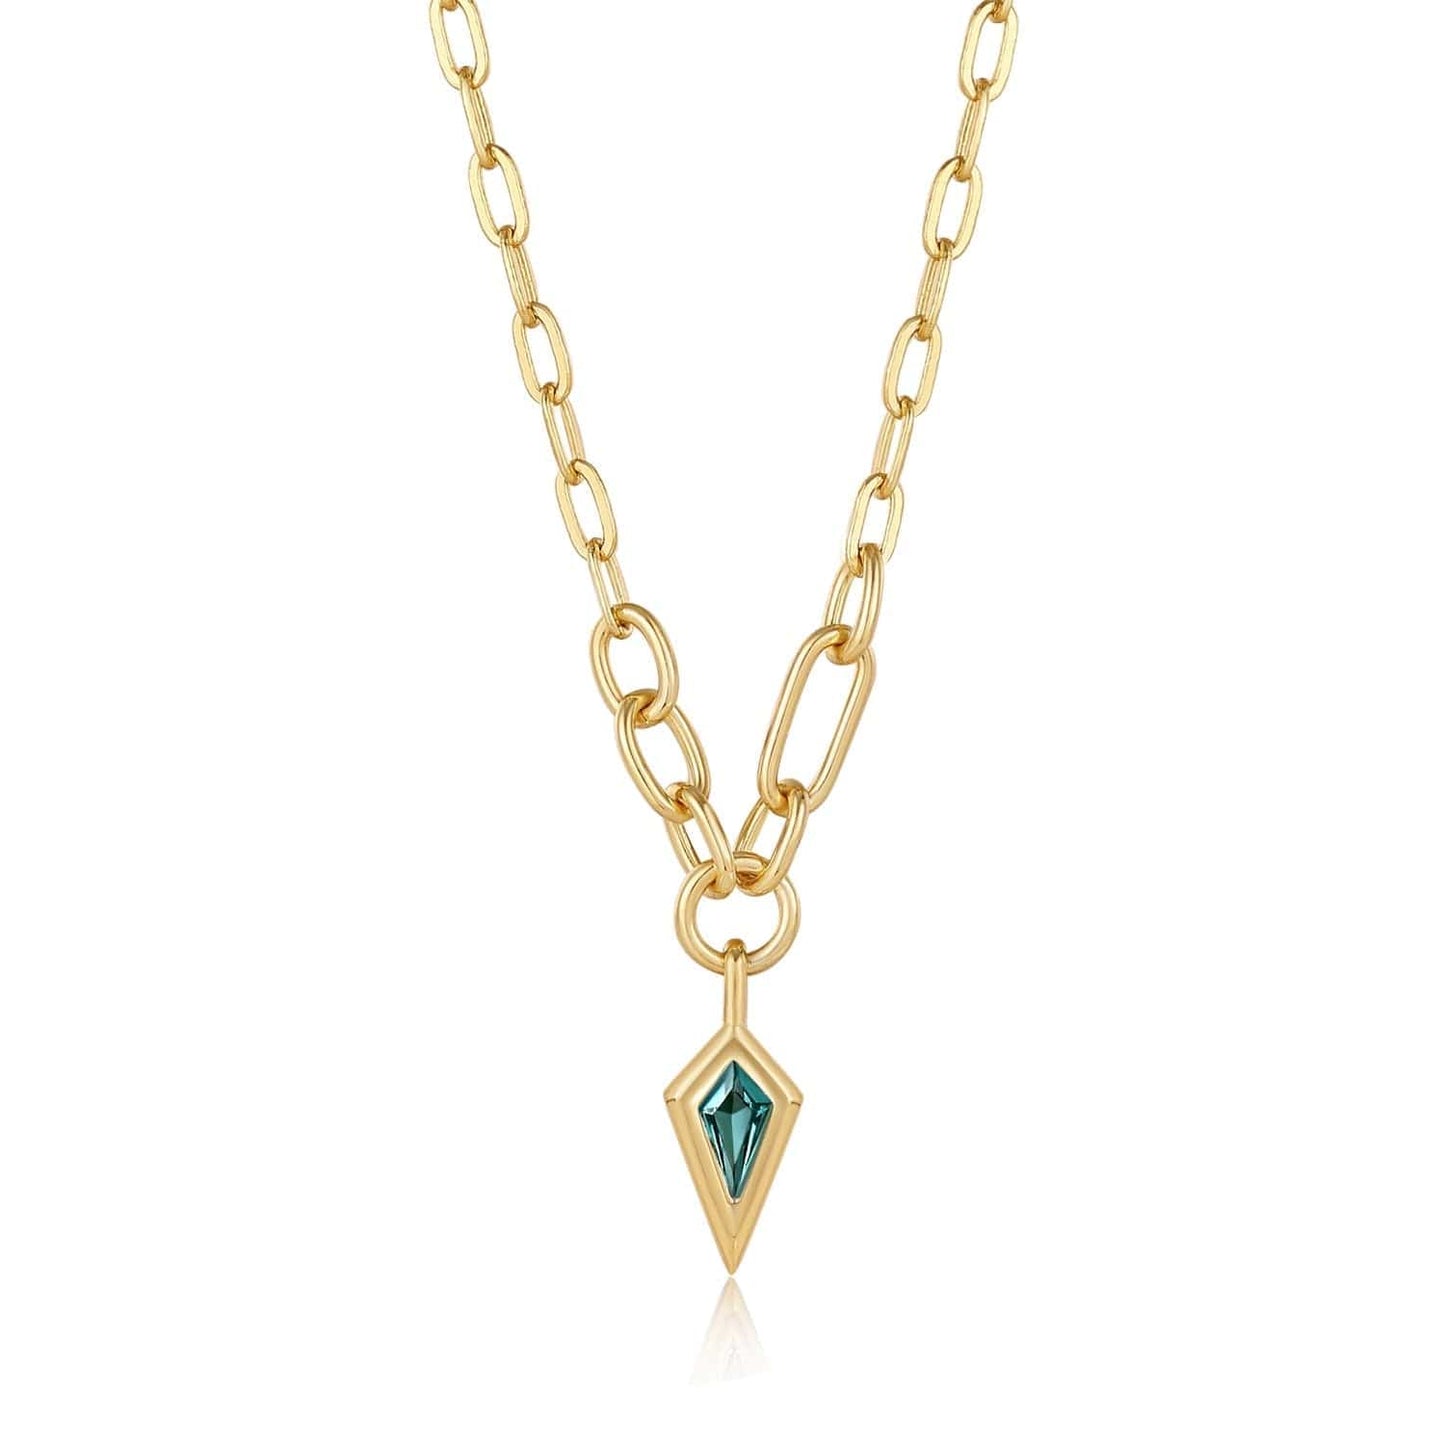 NKL-GPL Gold Teal Sparkle Drop Pendant Chunky Chain Necklace